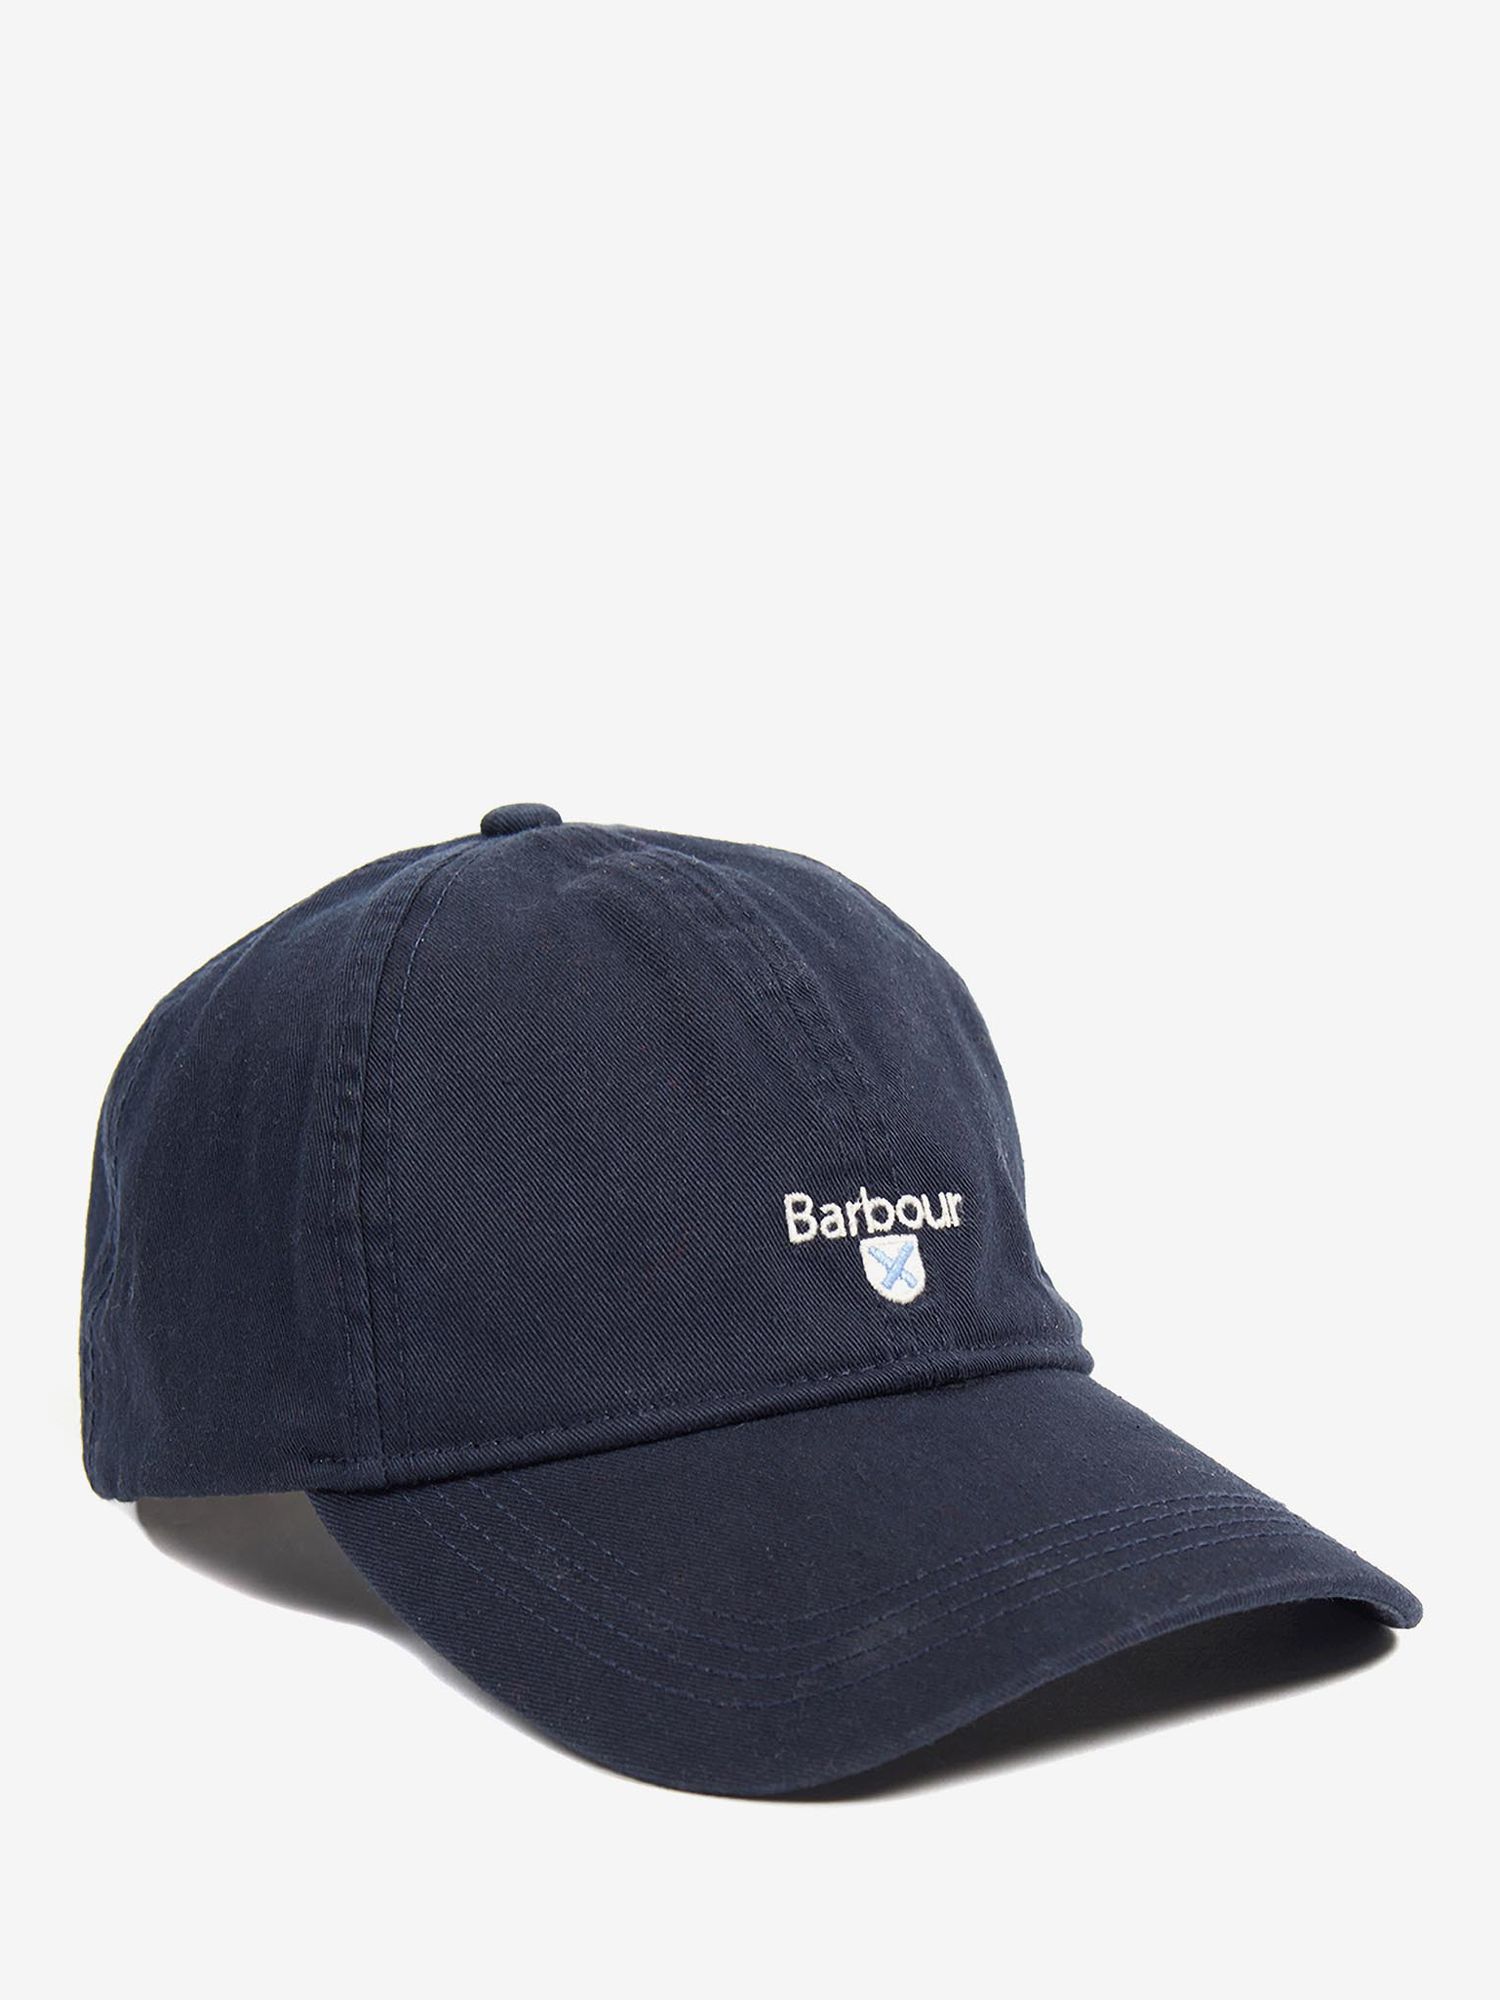 Barbour Cascade Sports Baseball Cap, One Size, Navy at John Lewis ...